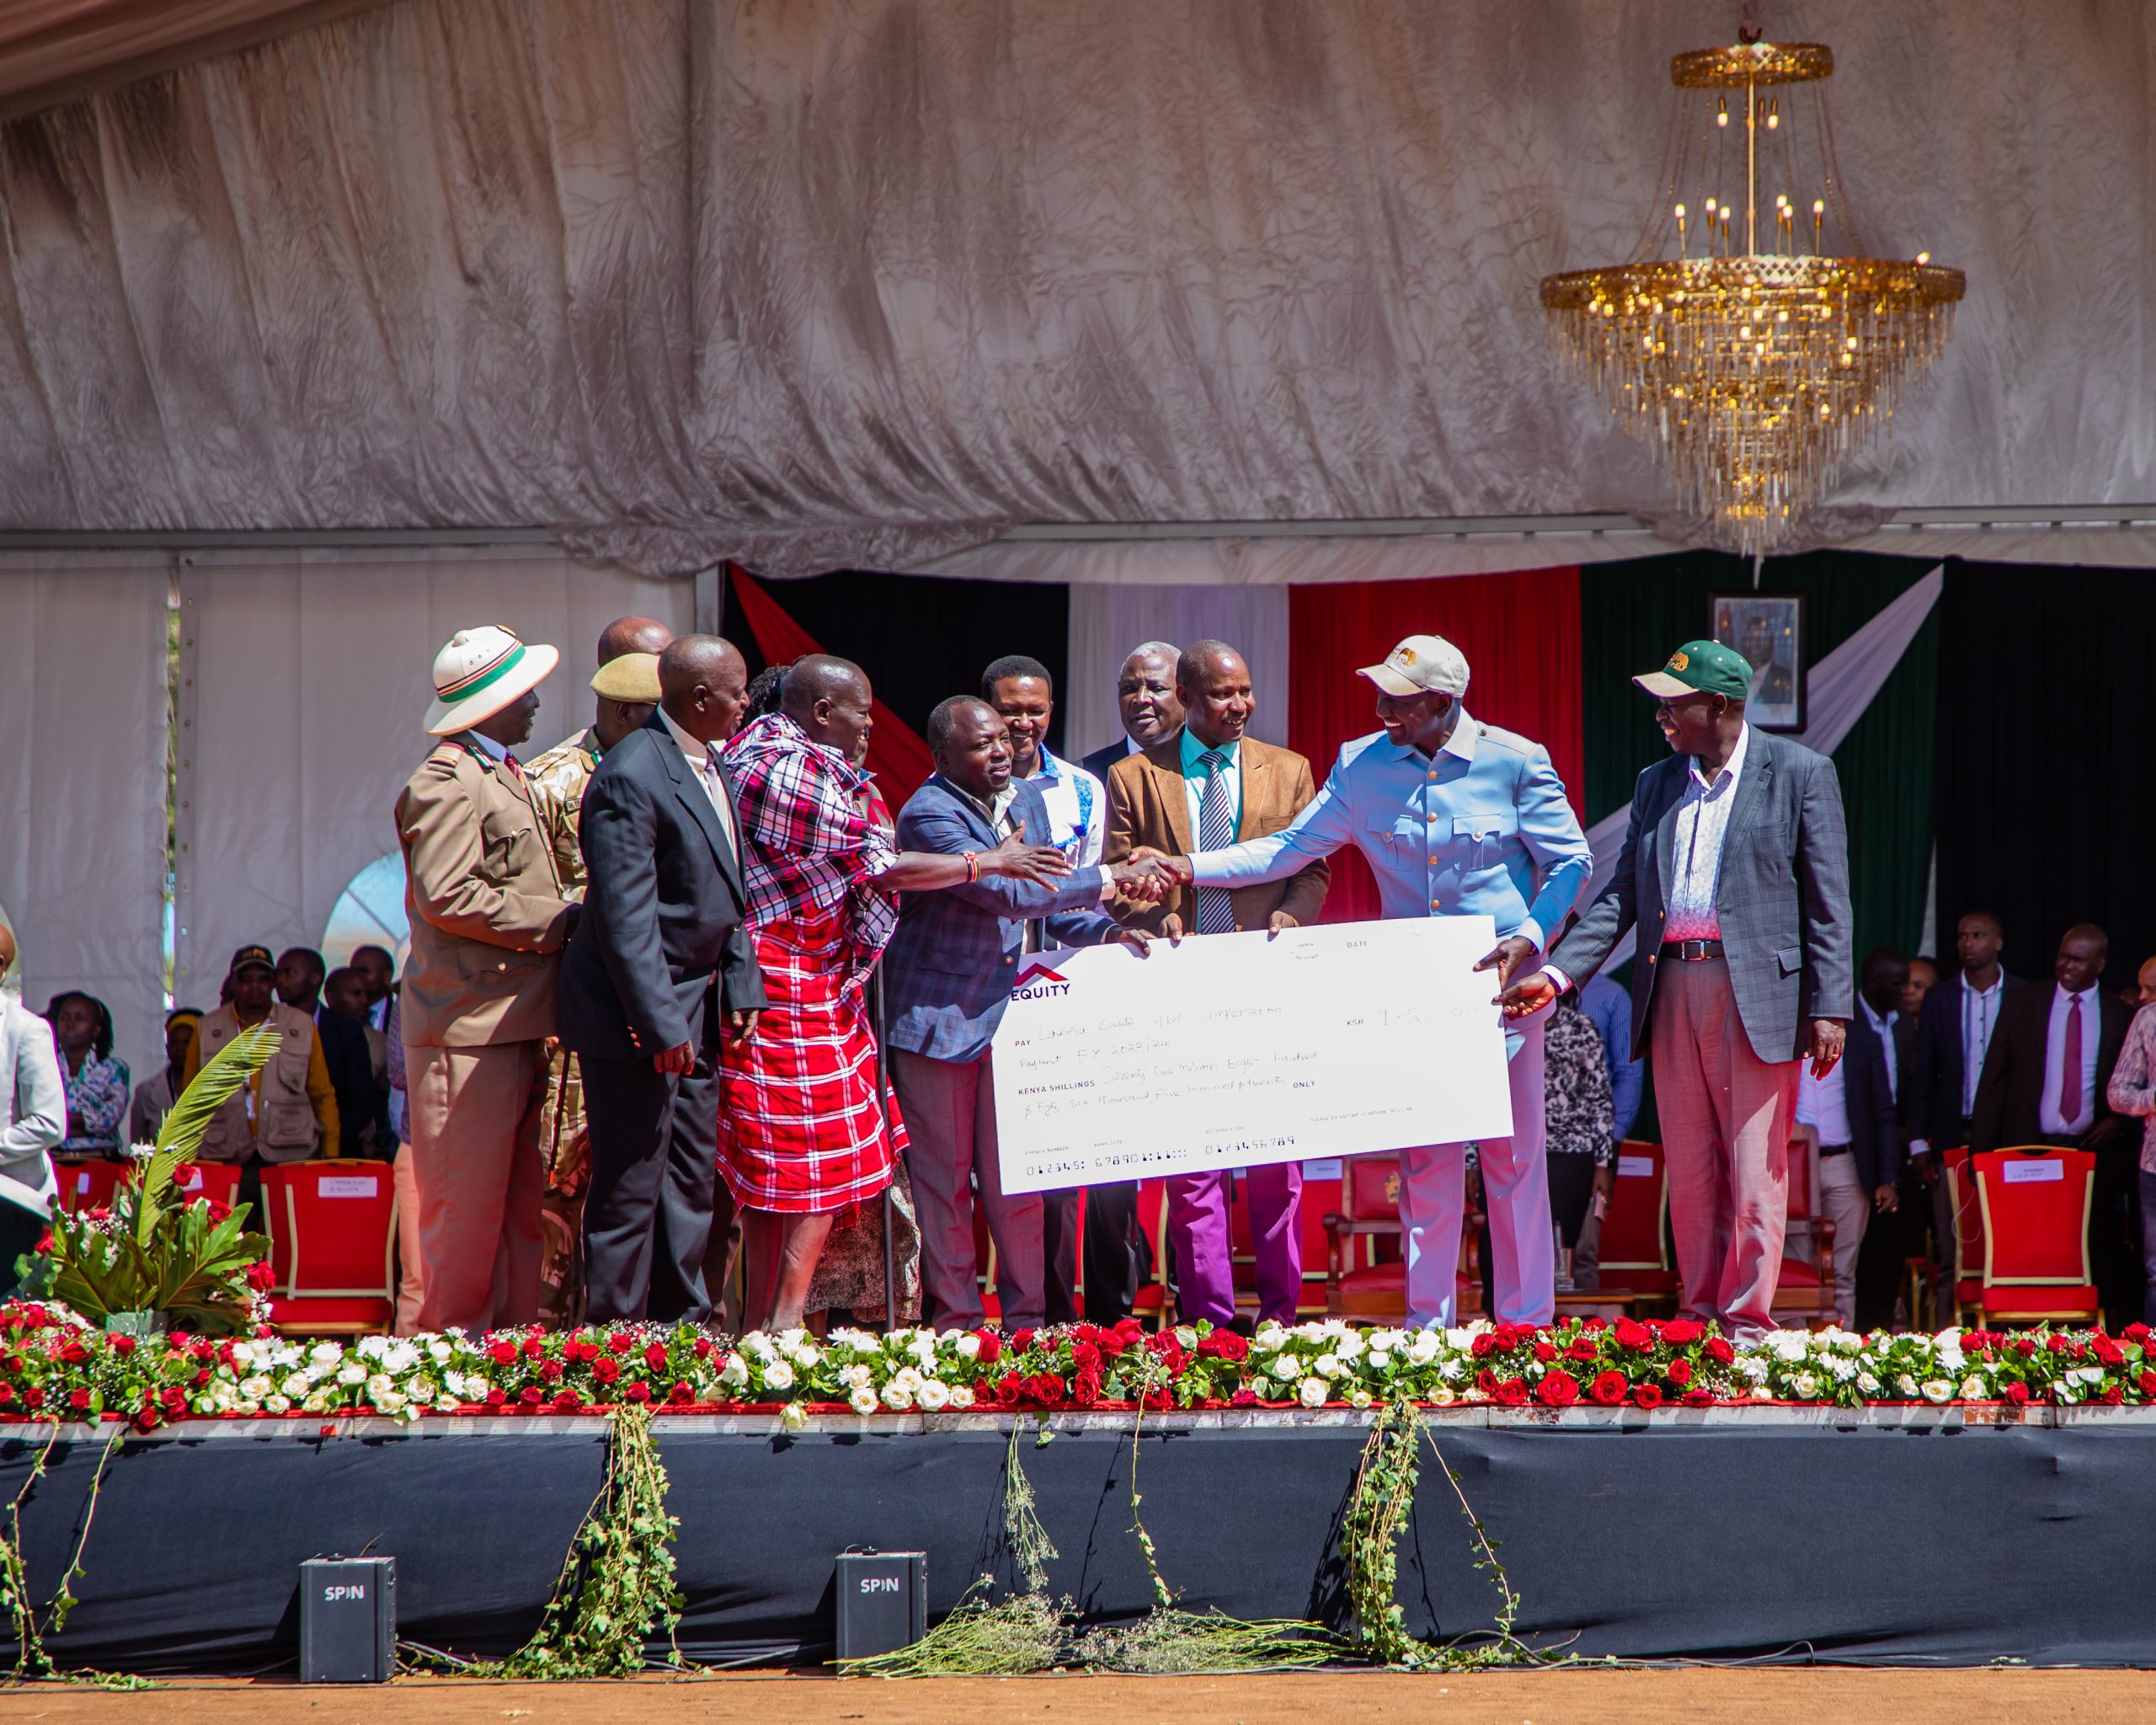 President William Ruto holds a dummy cheque to symbolise the launch of payment of Sh 960 million as compensation to families and victims who suffered death, injuries, damages to crops and property and livestock predation across the country. The event was held in Rumuruti Laikipia County.